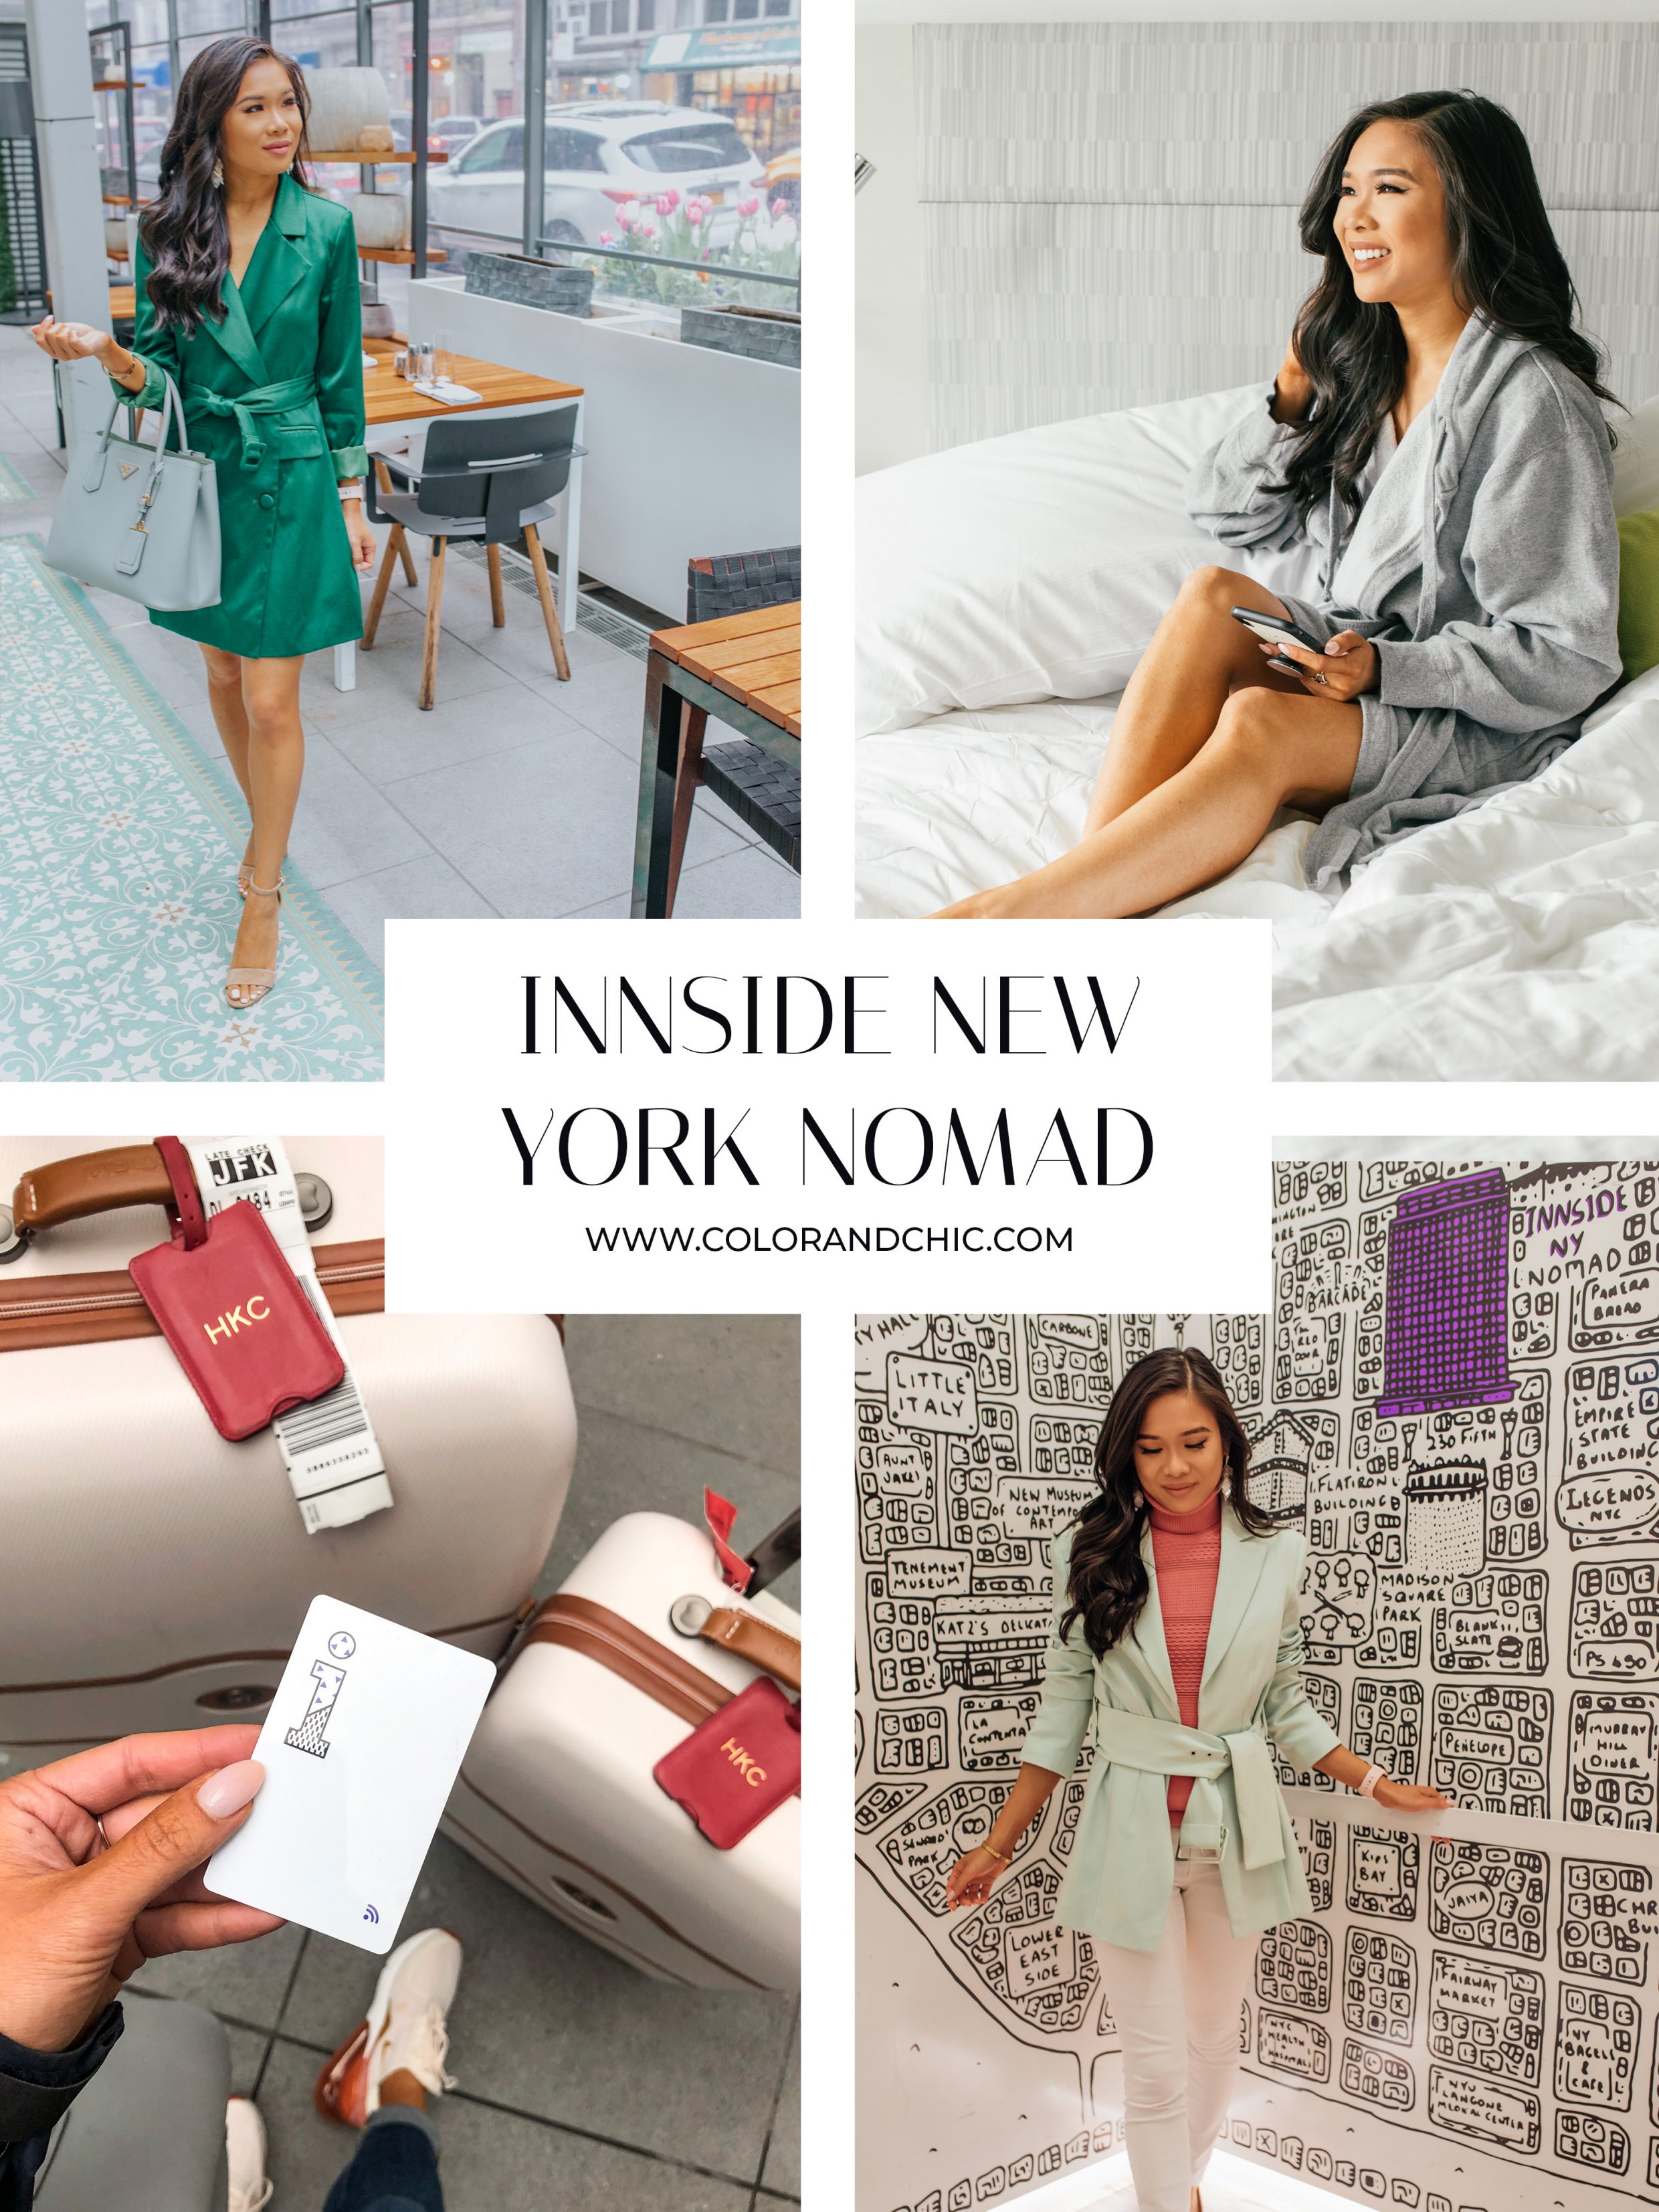 Why Innside New York NoMad is the place to stay for a work trip